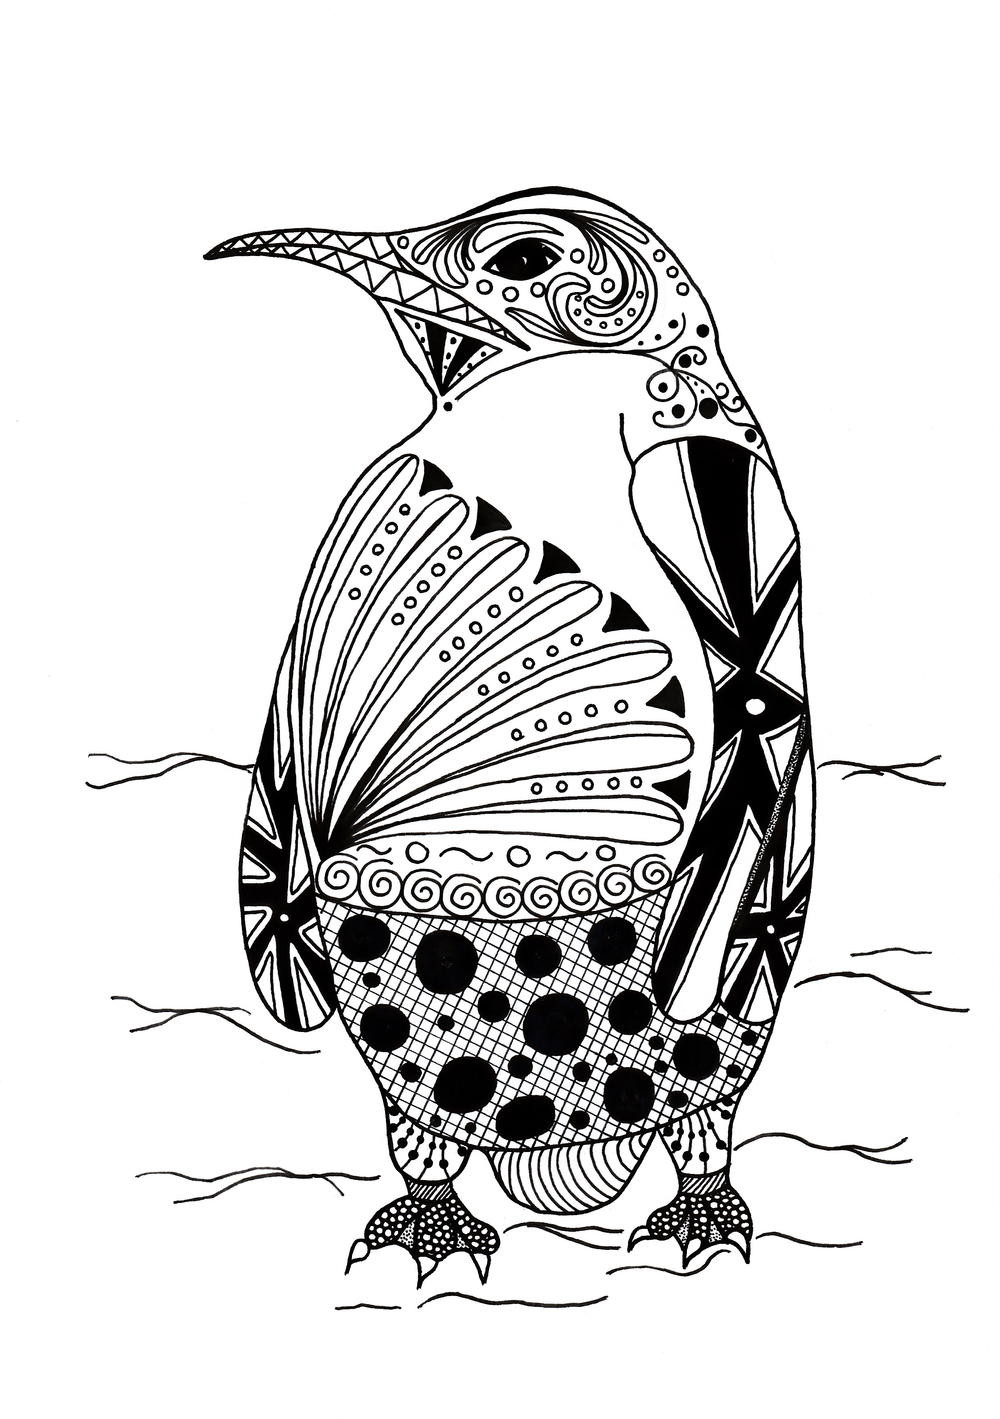 Large Coloring Pages For Adults
 Intricate Penguin Adult Coloring Page